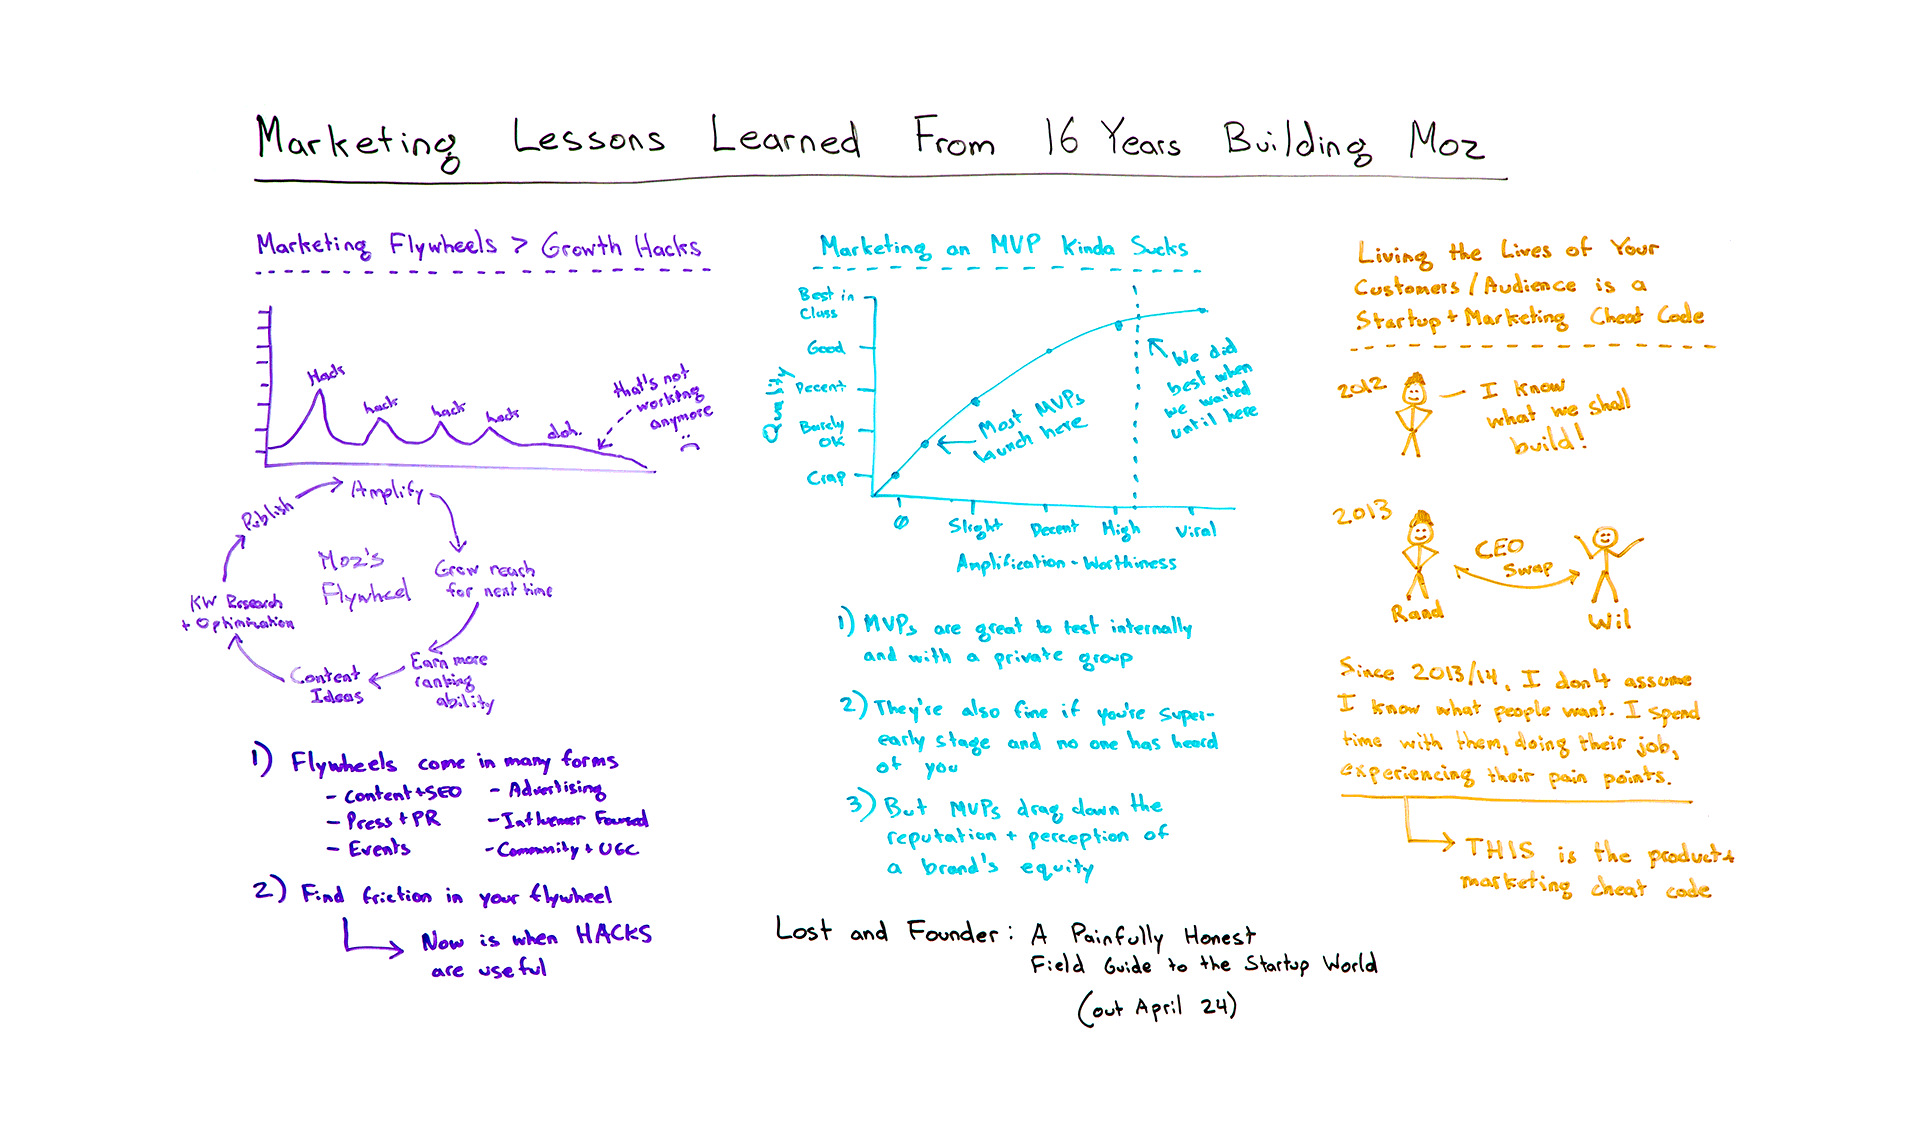 Marketing Lessons Learned from 16 Years of Building Moz